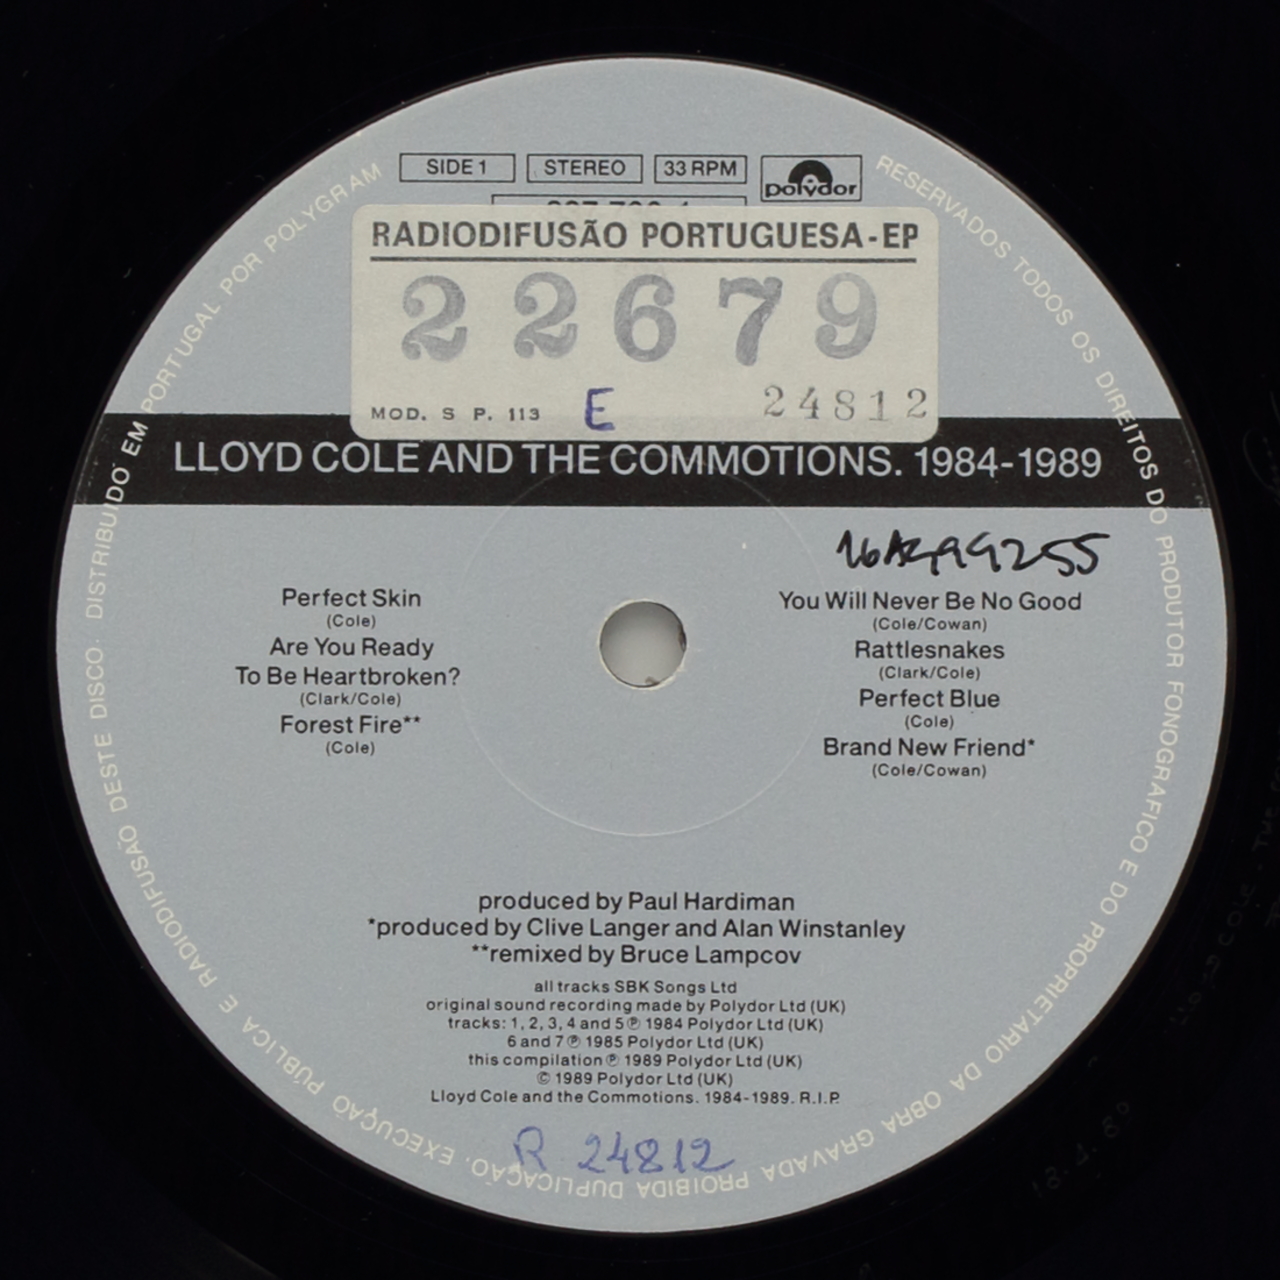 Lloyd Cole and the Commotions 1984-1989